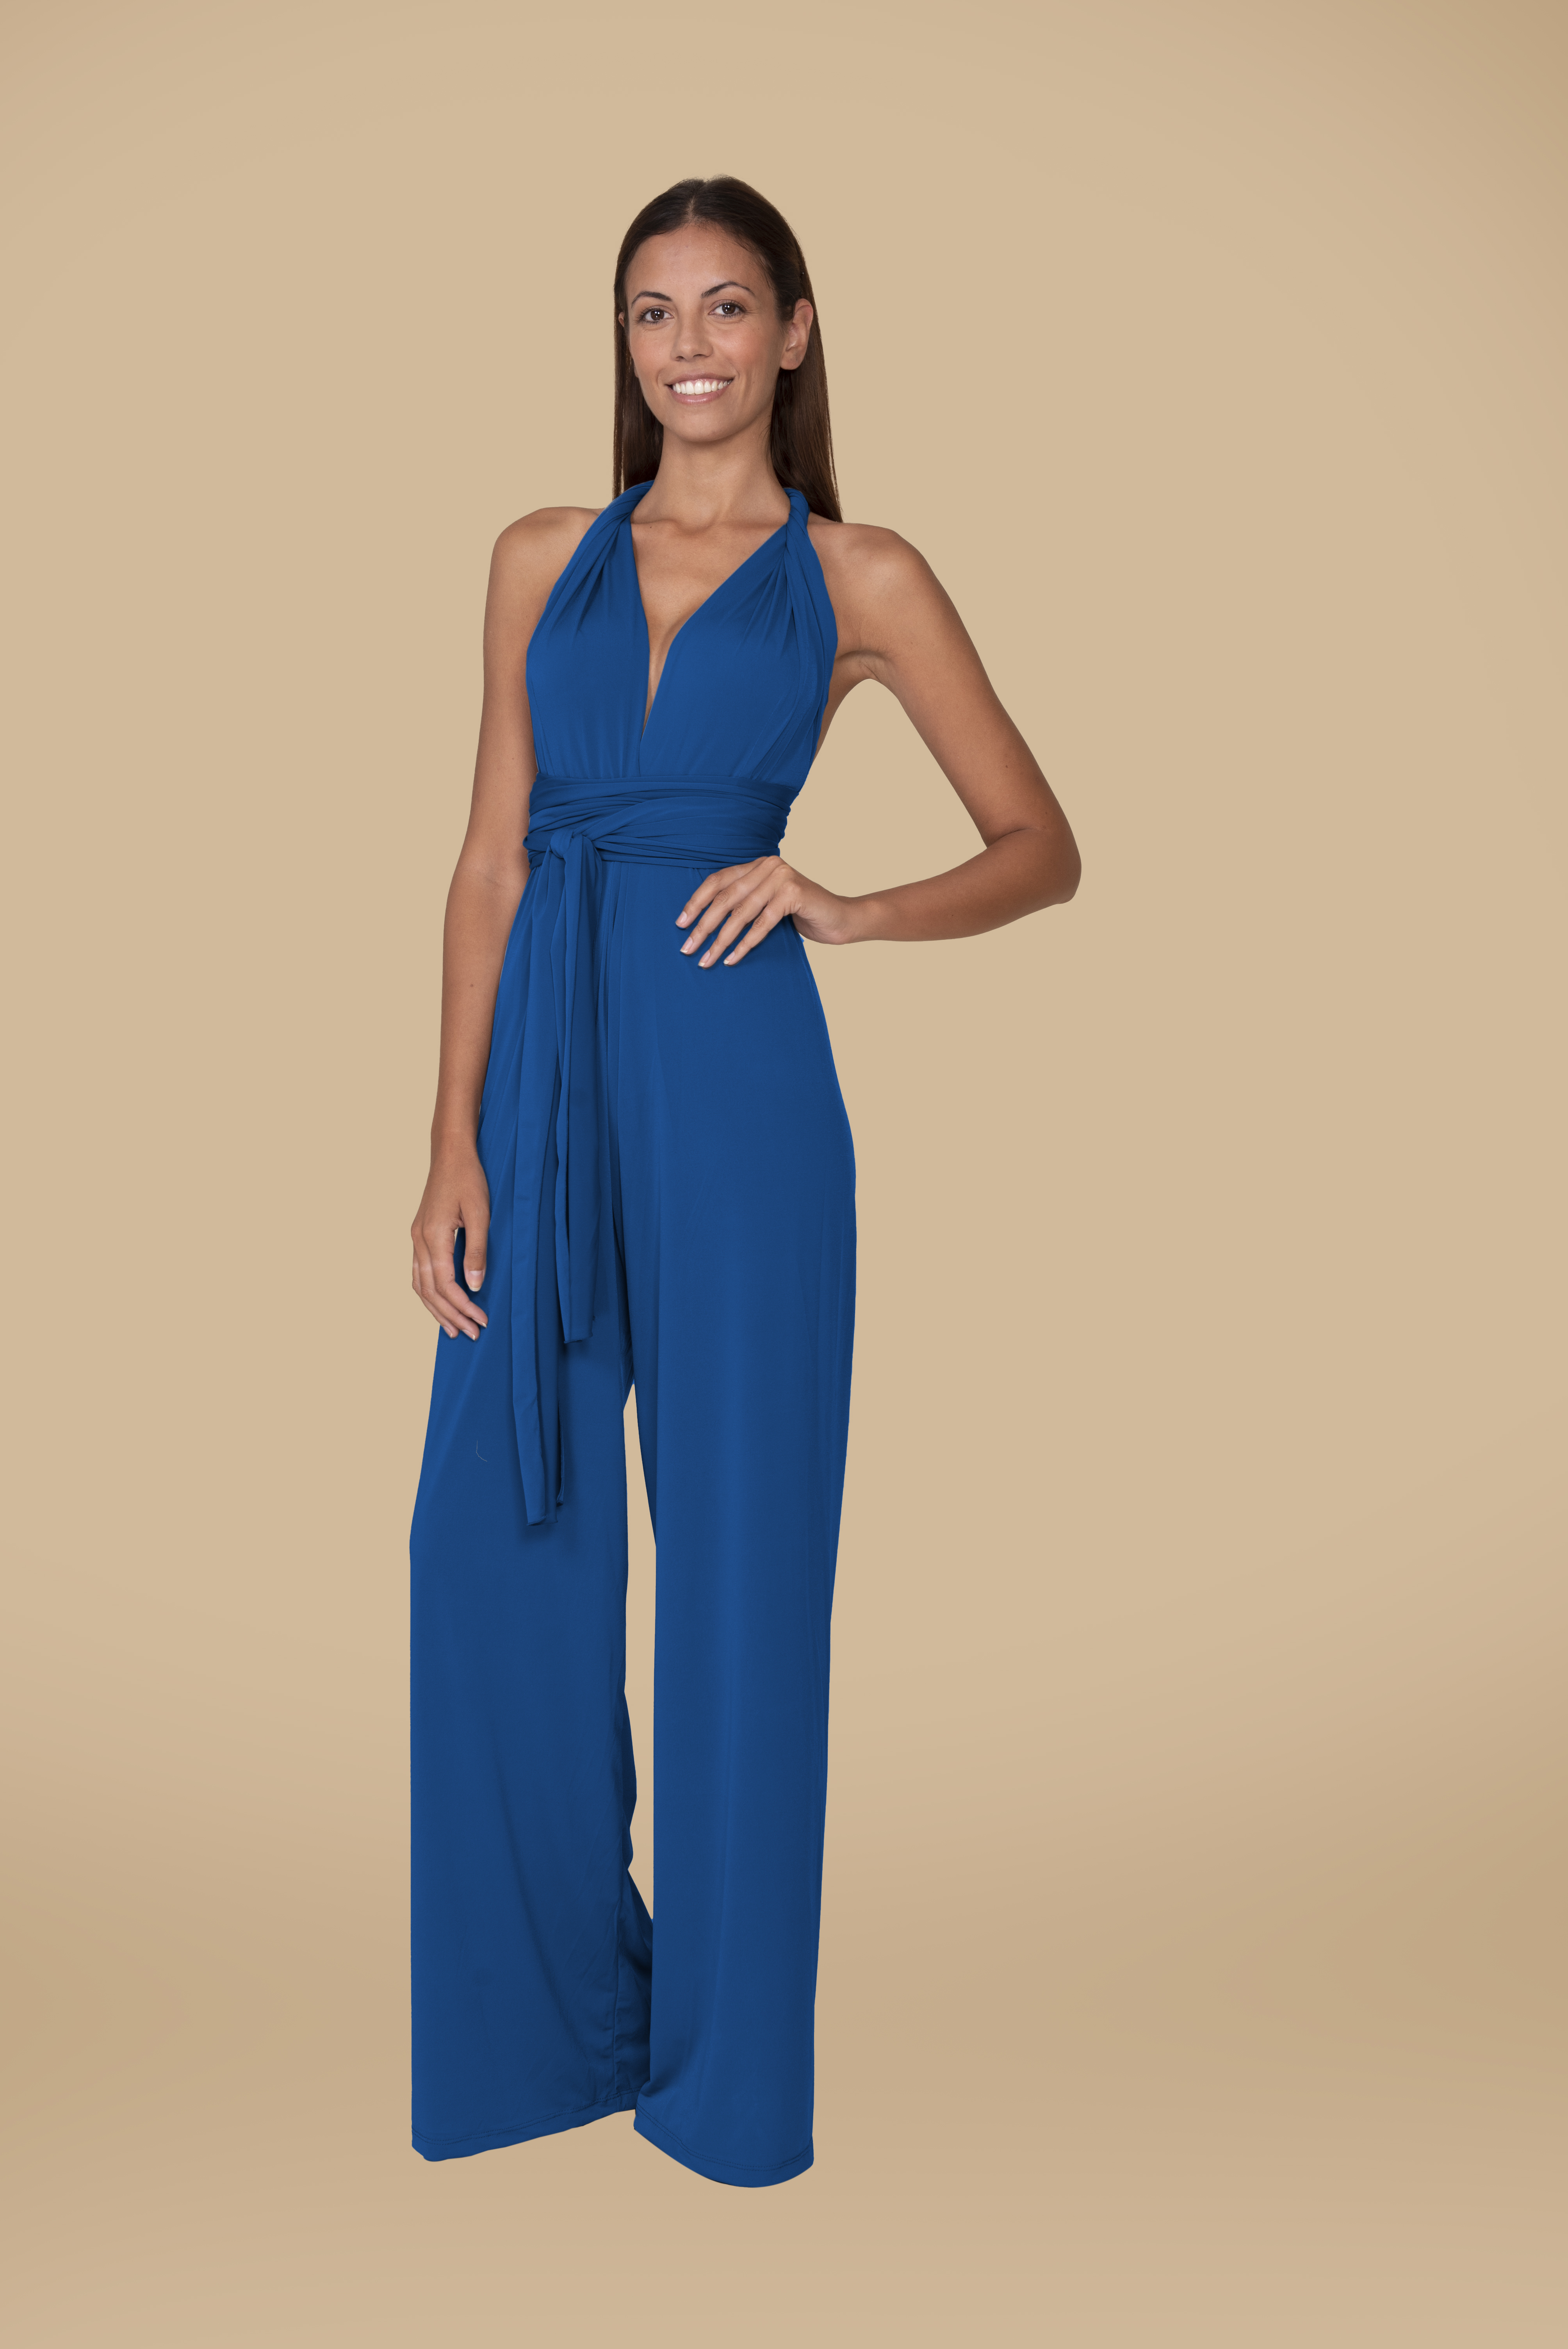 JUMPSUIT IN ELECTRIC BLUE by Infinit Barcelona